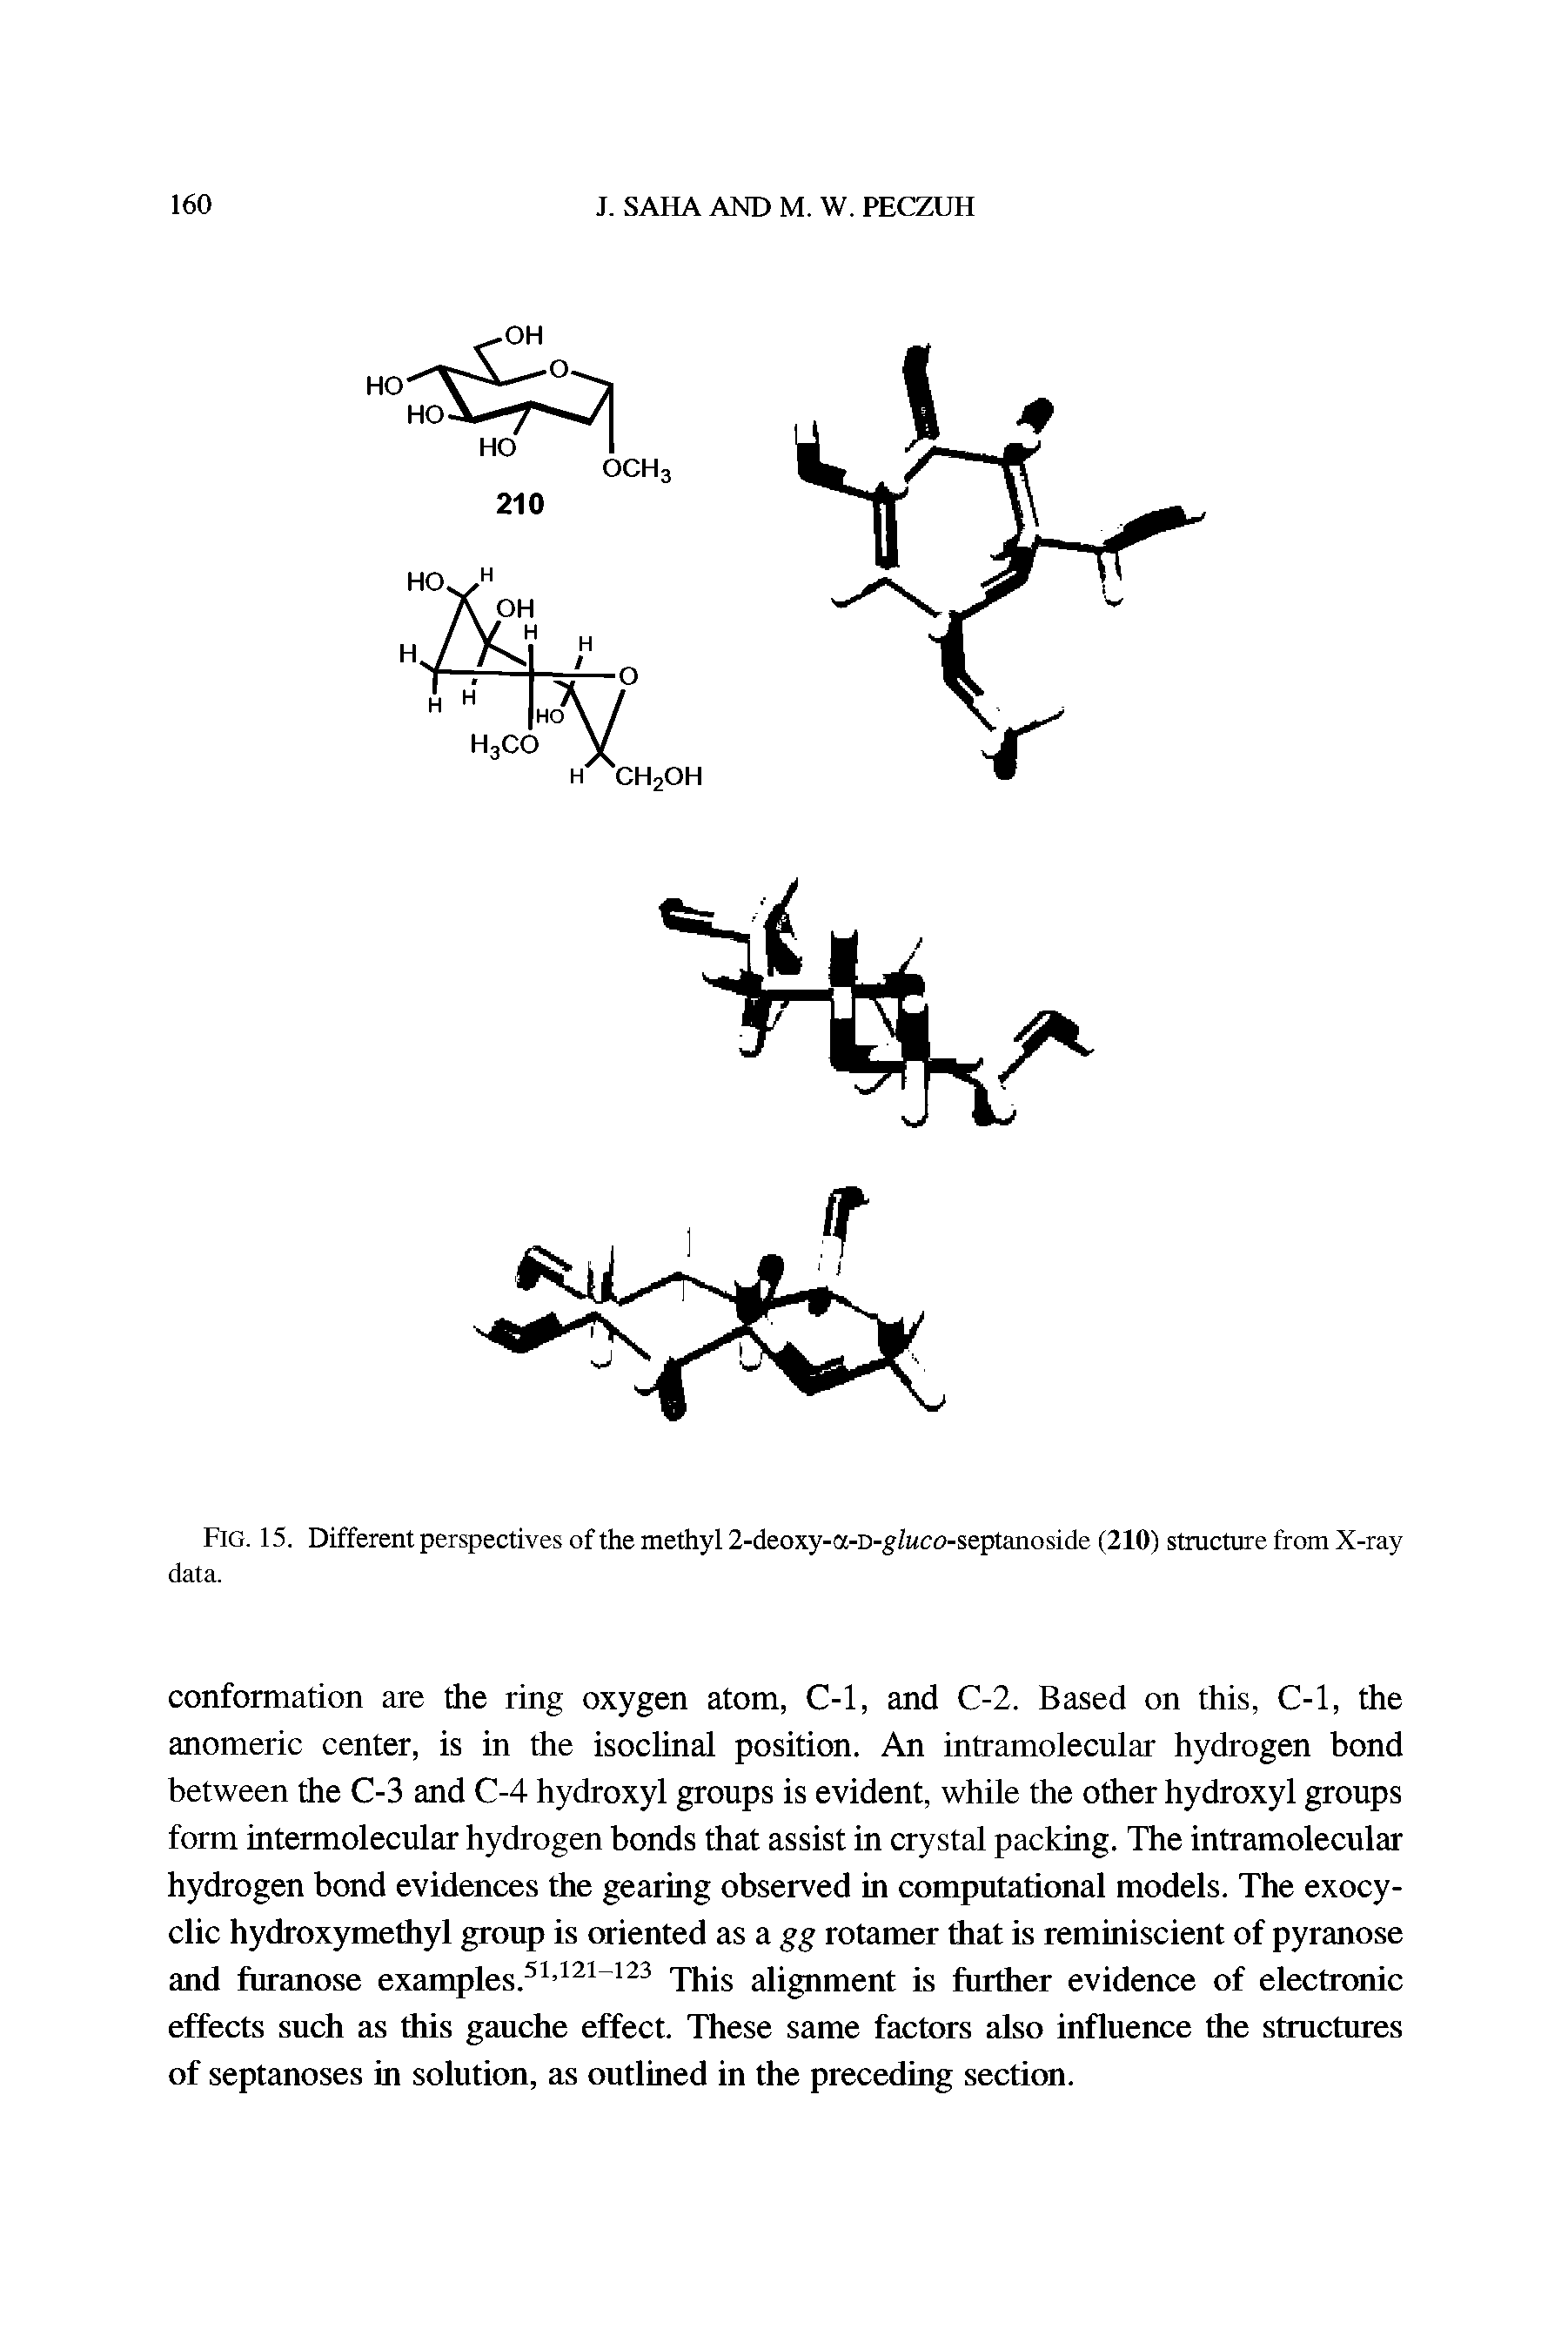 Fig. 15. Different perspectives of the methyl 2-deoxy-a-D-g/nco-septanoside (210) structure from X-ray data.